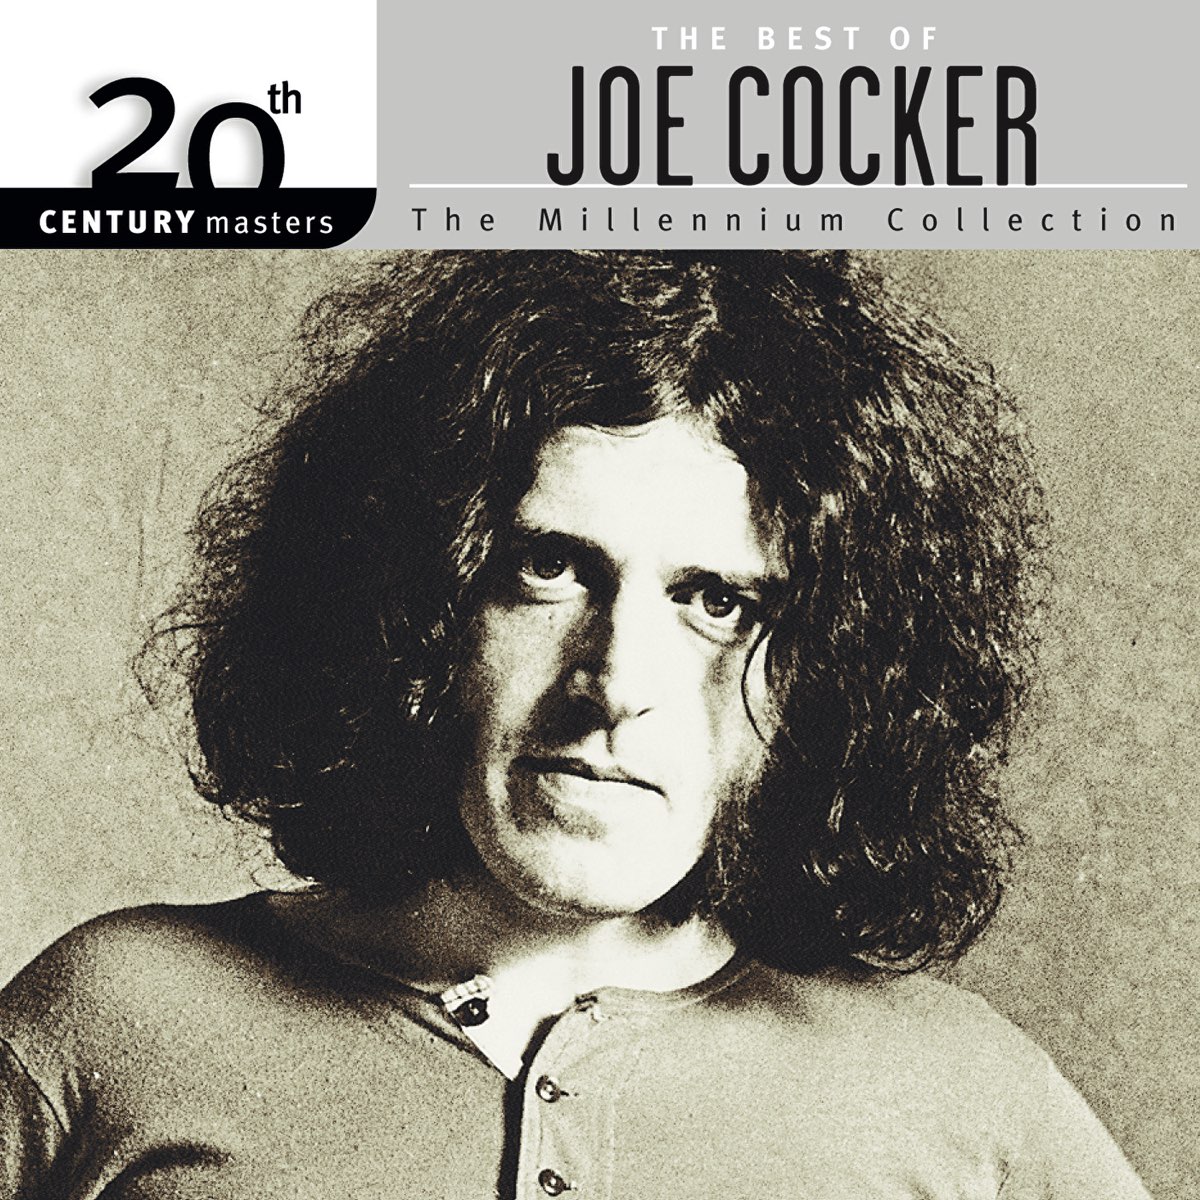 ‎20th Century Masters The Millennium Collection The Best Of Joe Cocker By Joe Cocker On Apple 